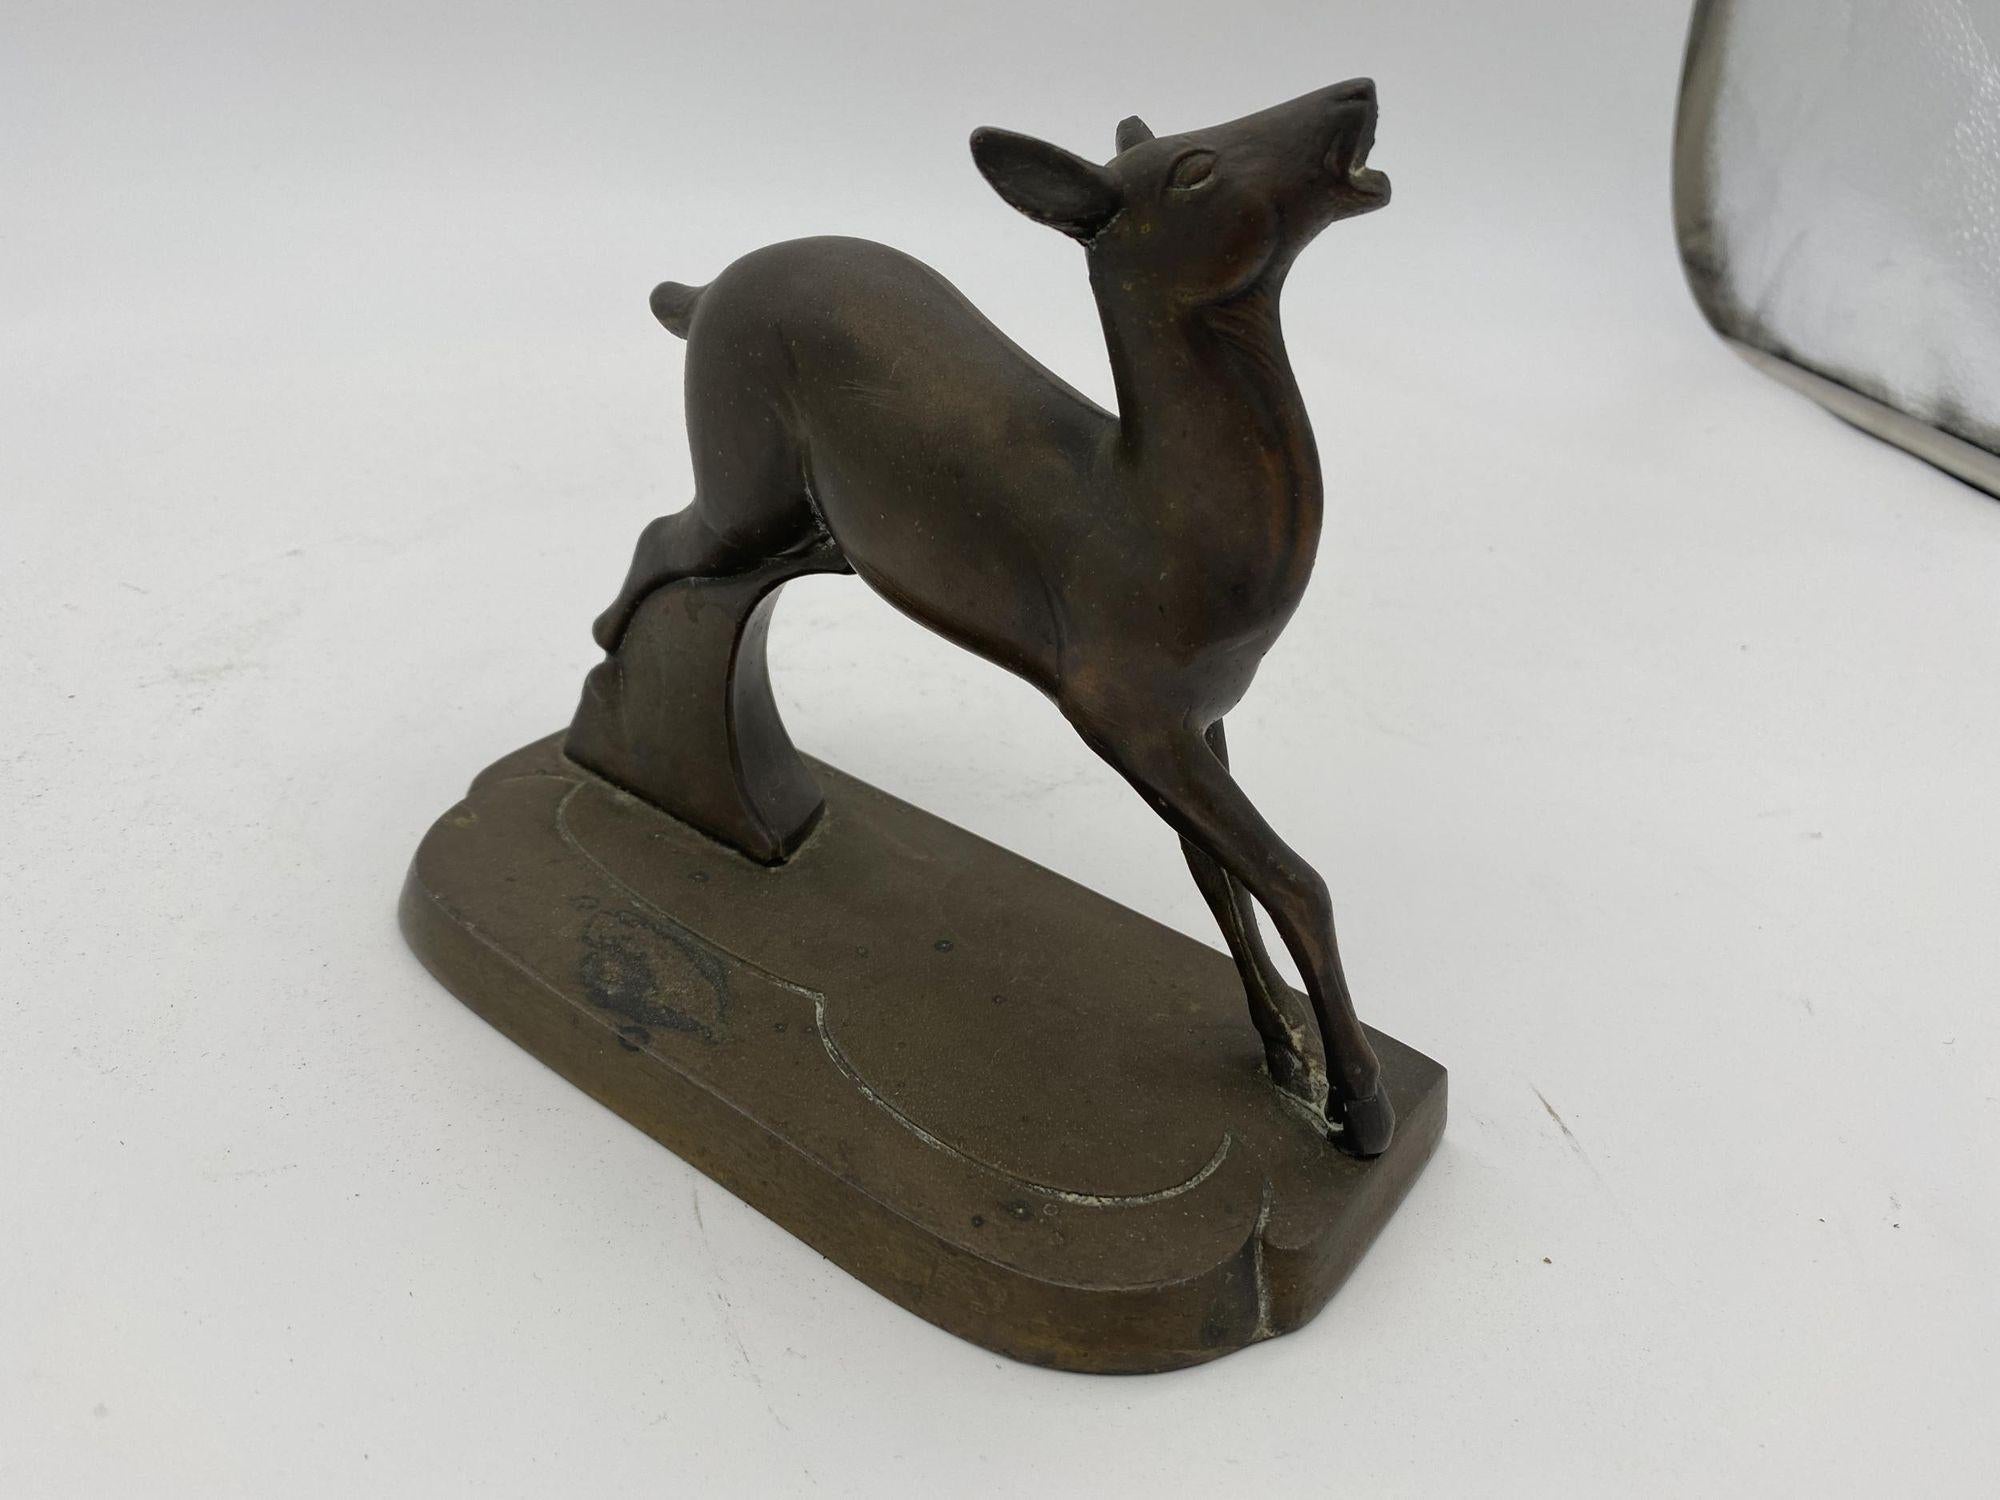 Vintage Art Deco signed Frankart brass-finish prancing doe female deer figural spelter sculpture. Circa 1920s-1930s.

Less common and a bit larger than many of Frankart’s sculptures this sculpture exhibits all the hallmarks of the Frankart